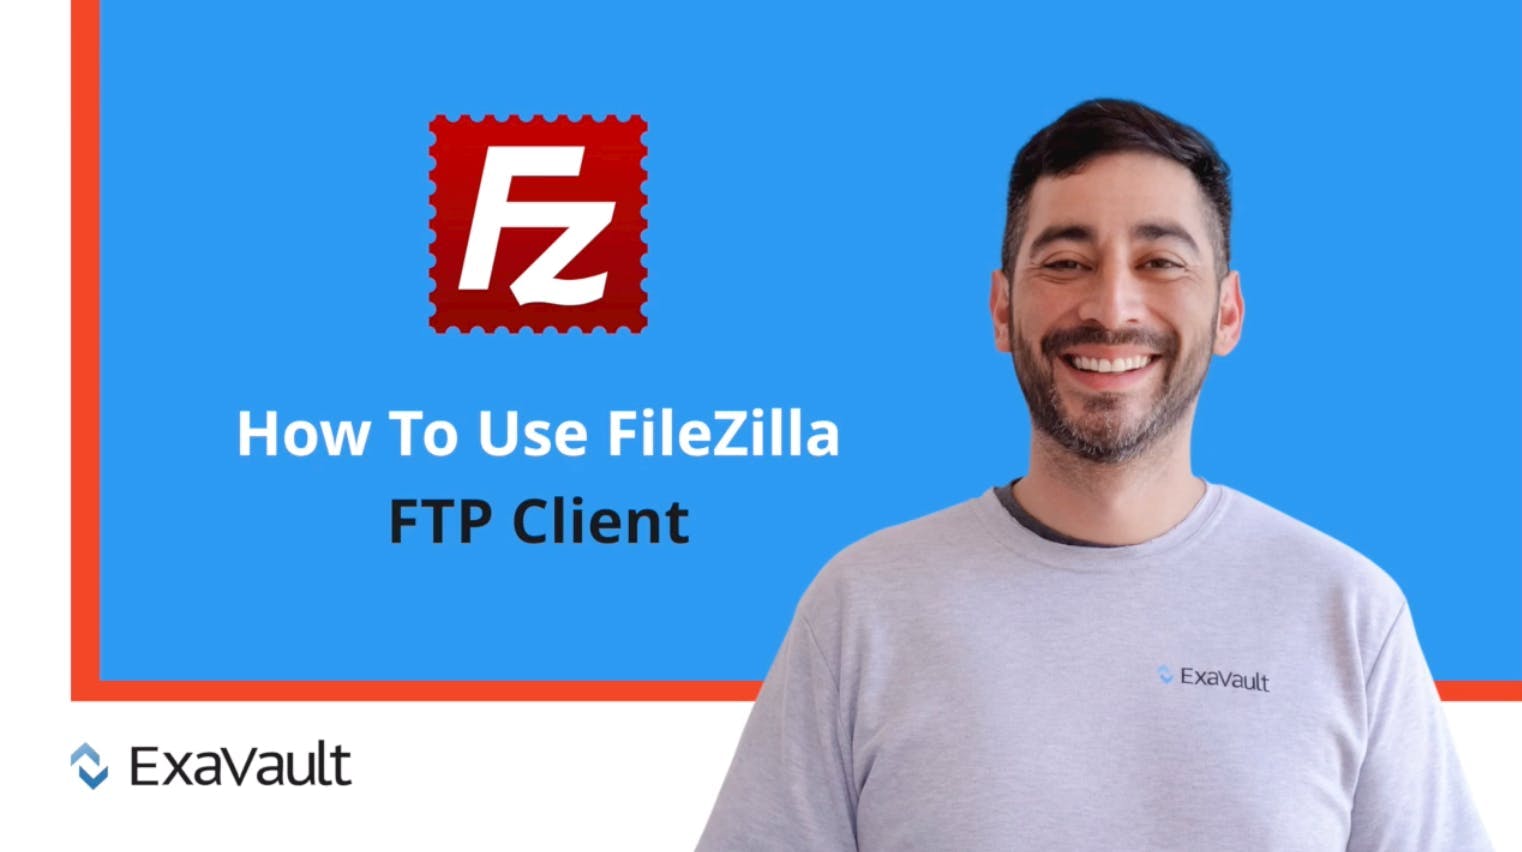 How to use FileZilla FTP client video thumbnail.